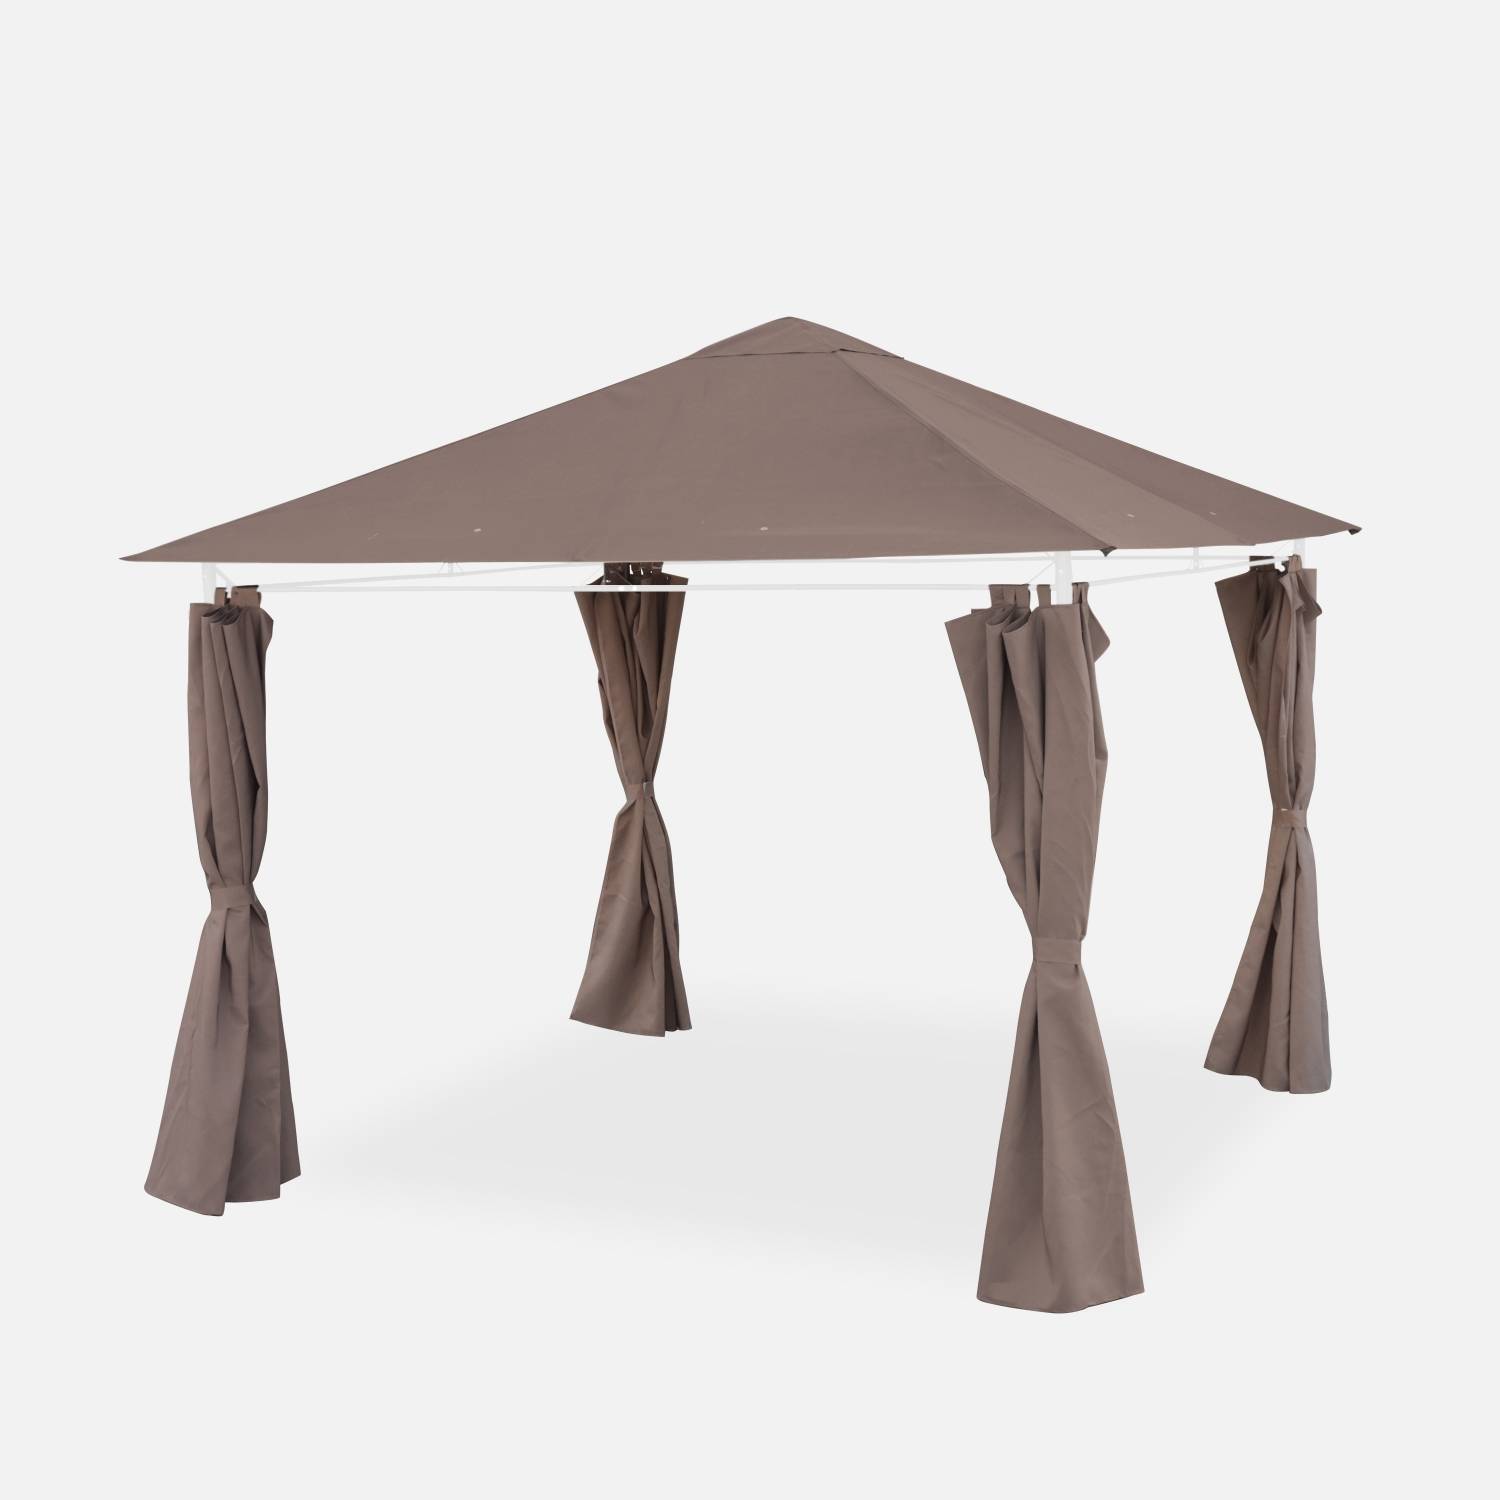 Replacement canopy and side curtain kit for gazebo, Beige-brown | sweeek